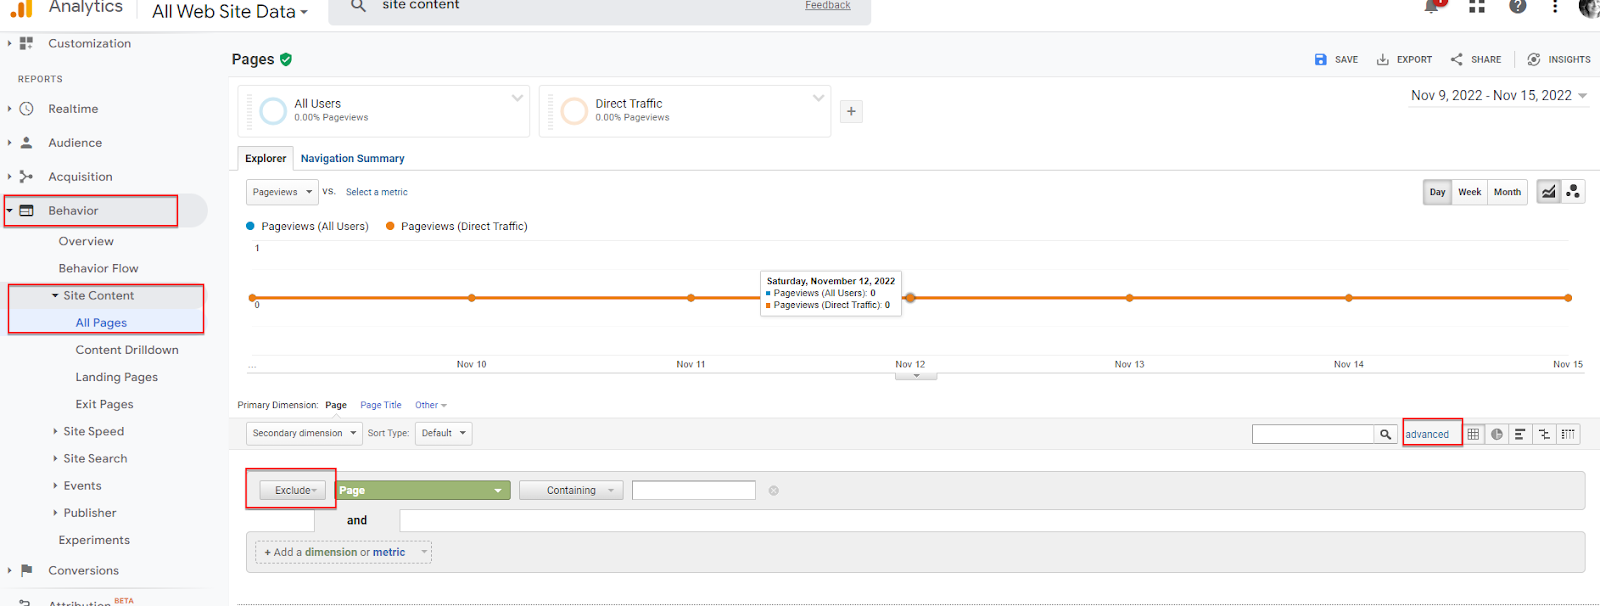 Google Analytics: behavior, site content, all pages